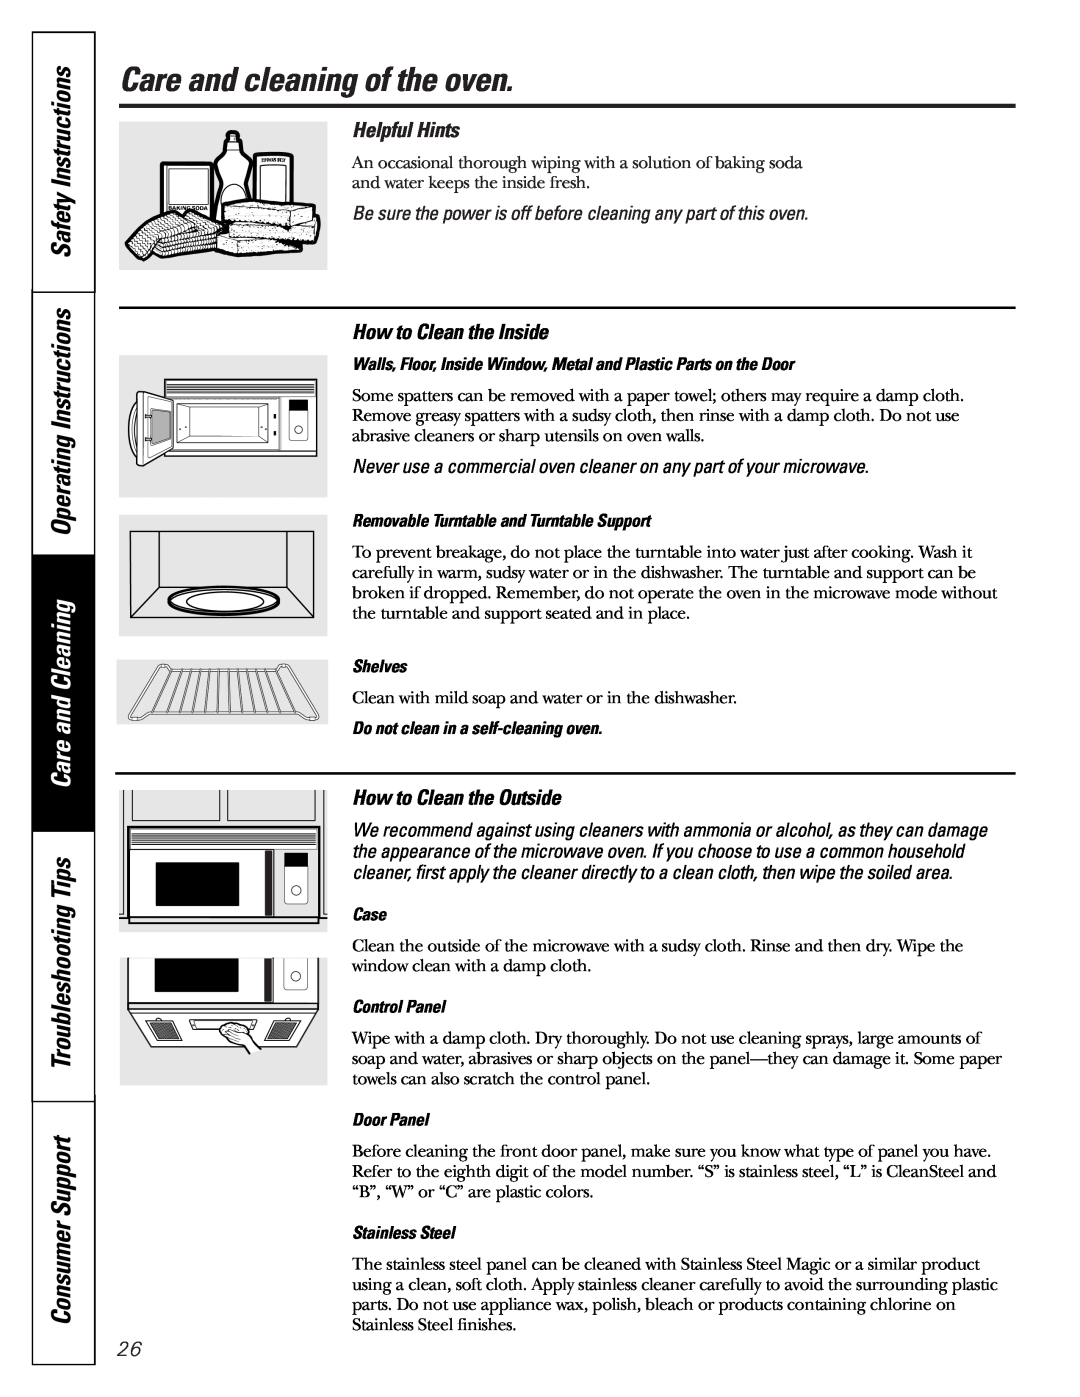 GE JVM1790 owner manual Care and cleaning of the oven, Helpful Hints, How to Clean the Inside, How to Clean the Outside 